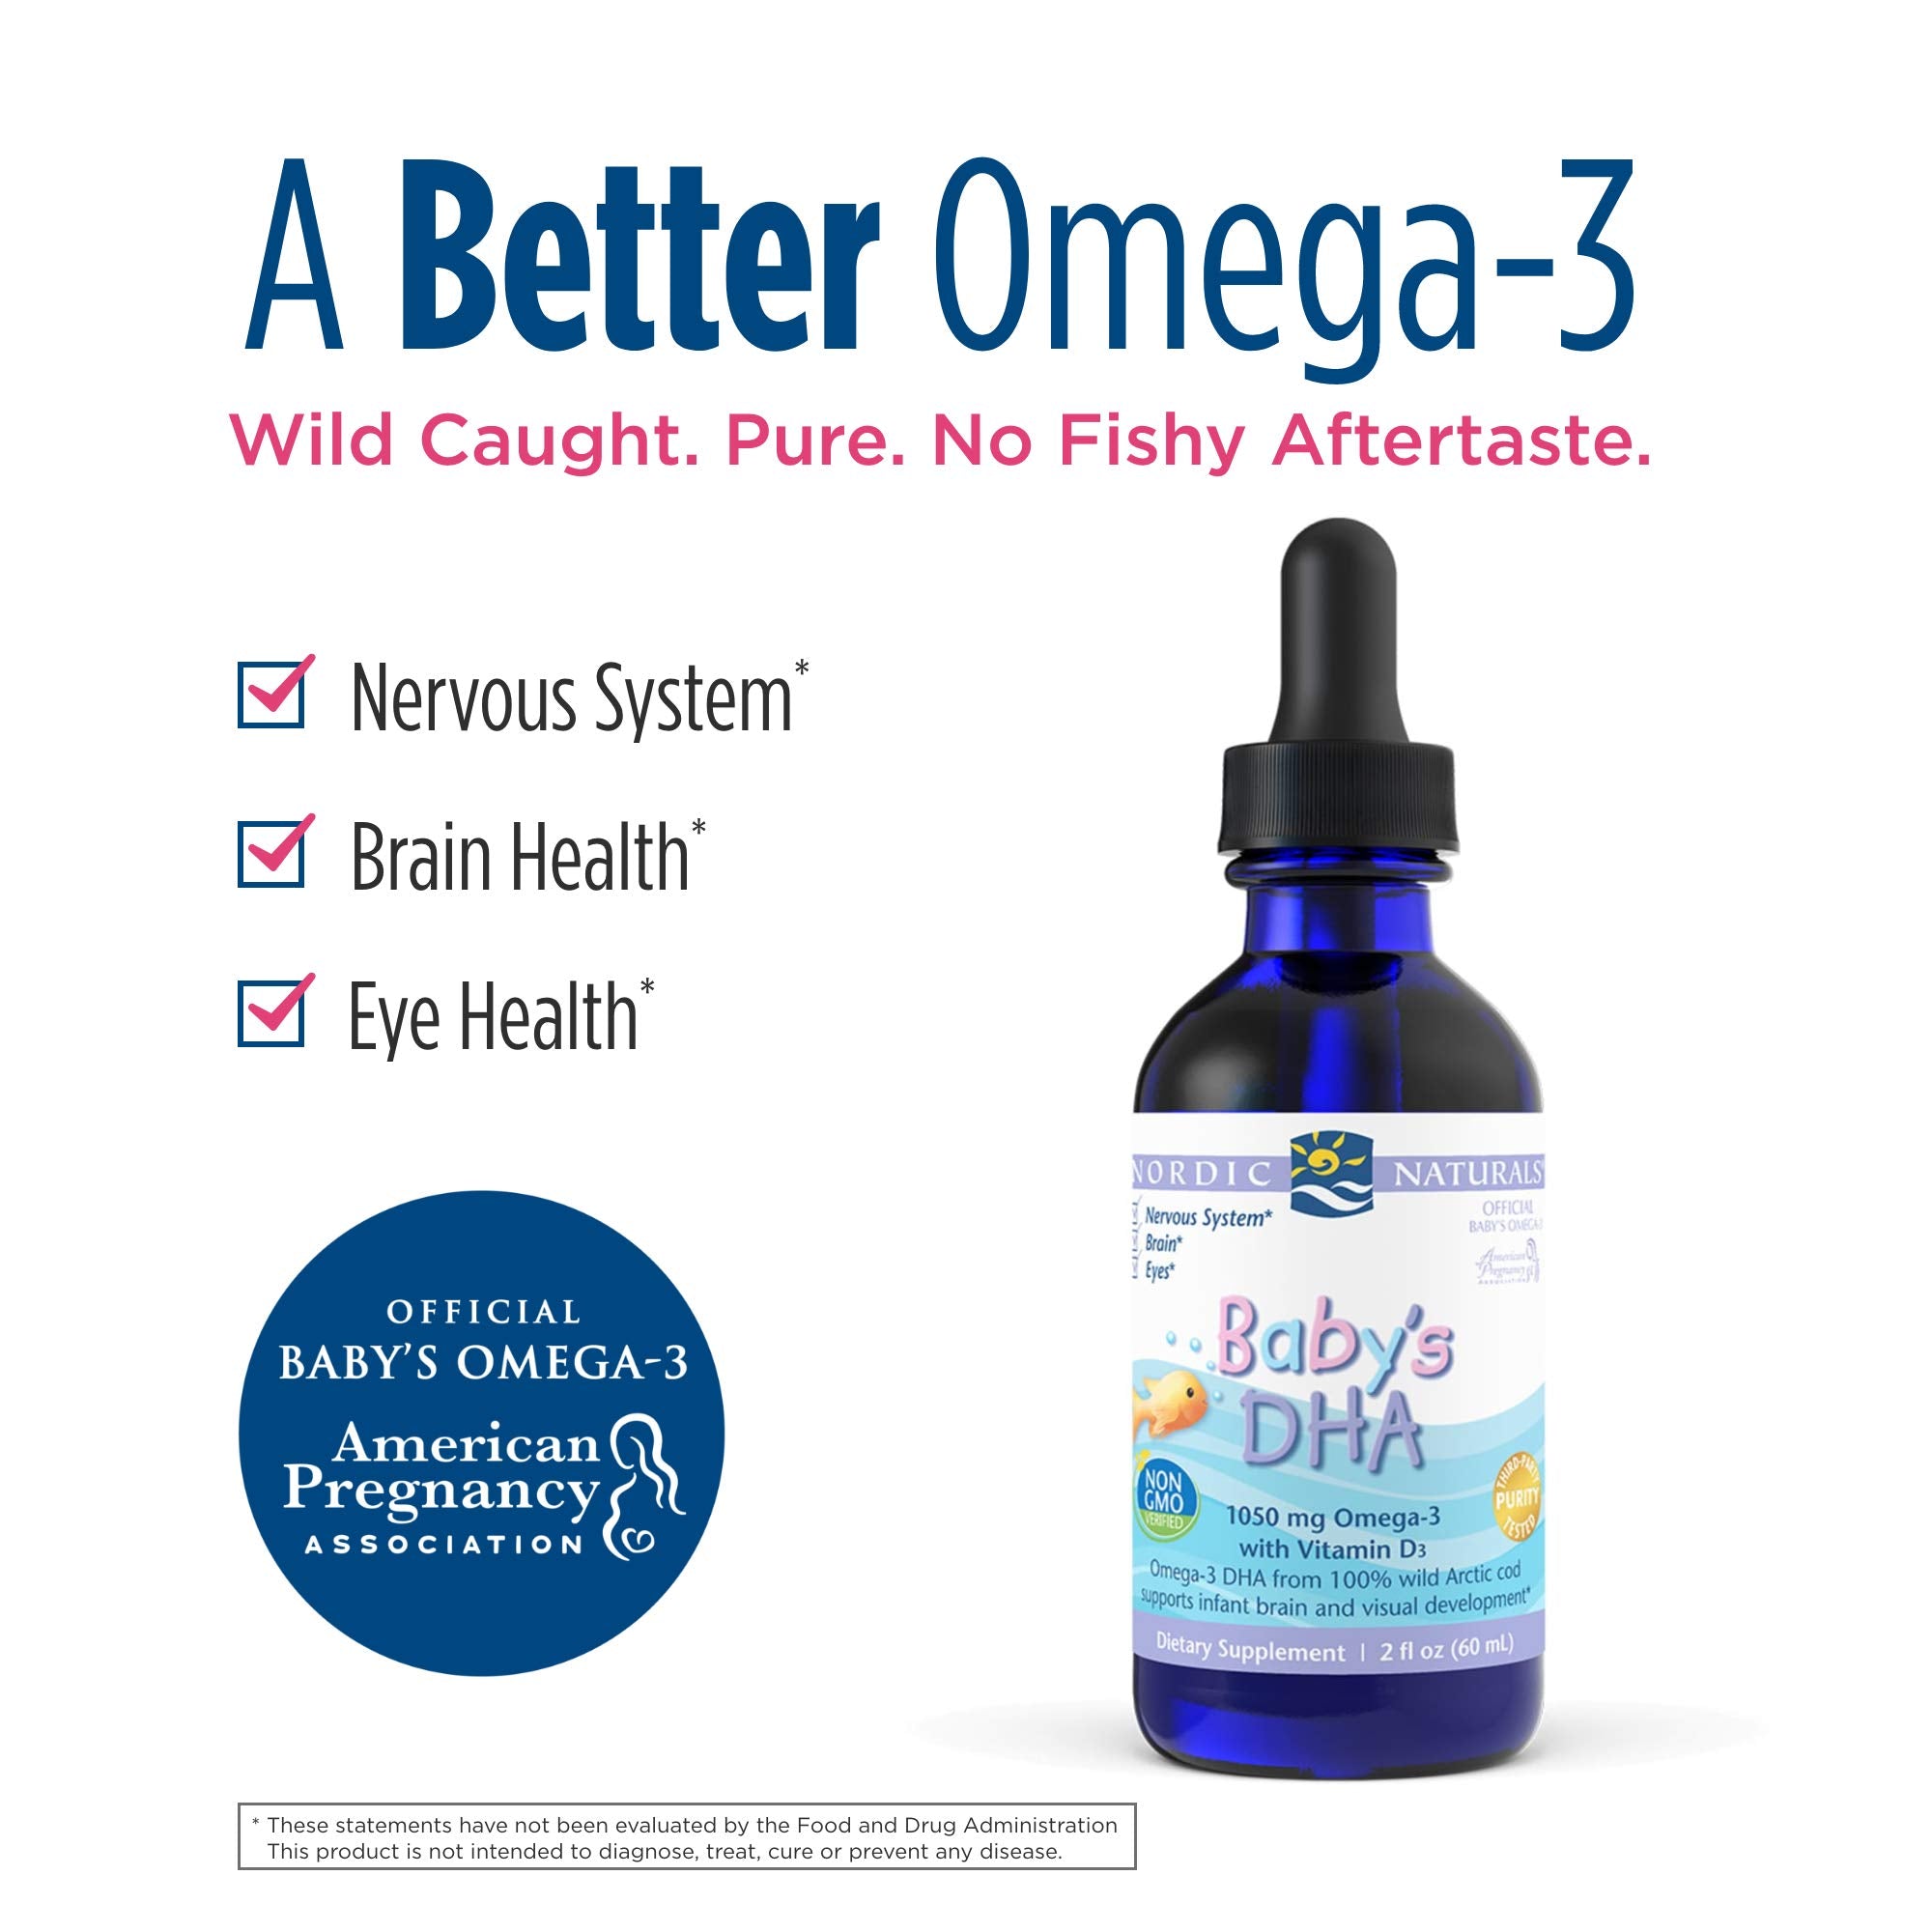 Nordic Naturals Baby’s DHA, Unflavored - 1050 mg Omega-3 + 300 IU Vitamin D3 - 2 oz - 2 Pack - Supports Brain, Vision & Nervous System Development in Babies - Non-GMO - 24 Servings